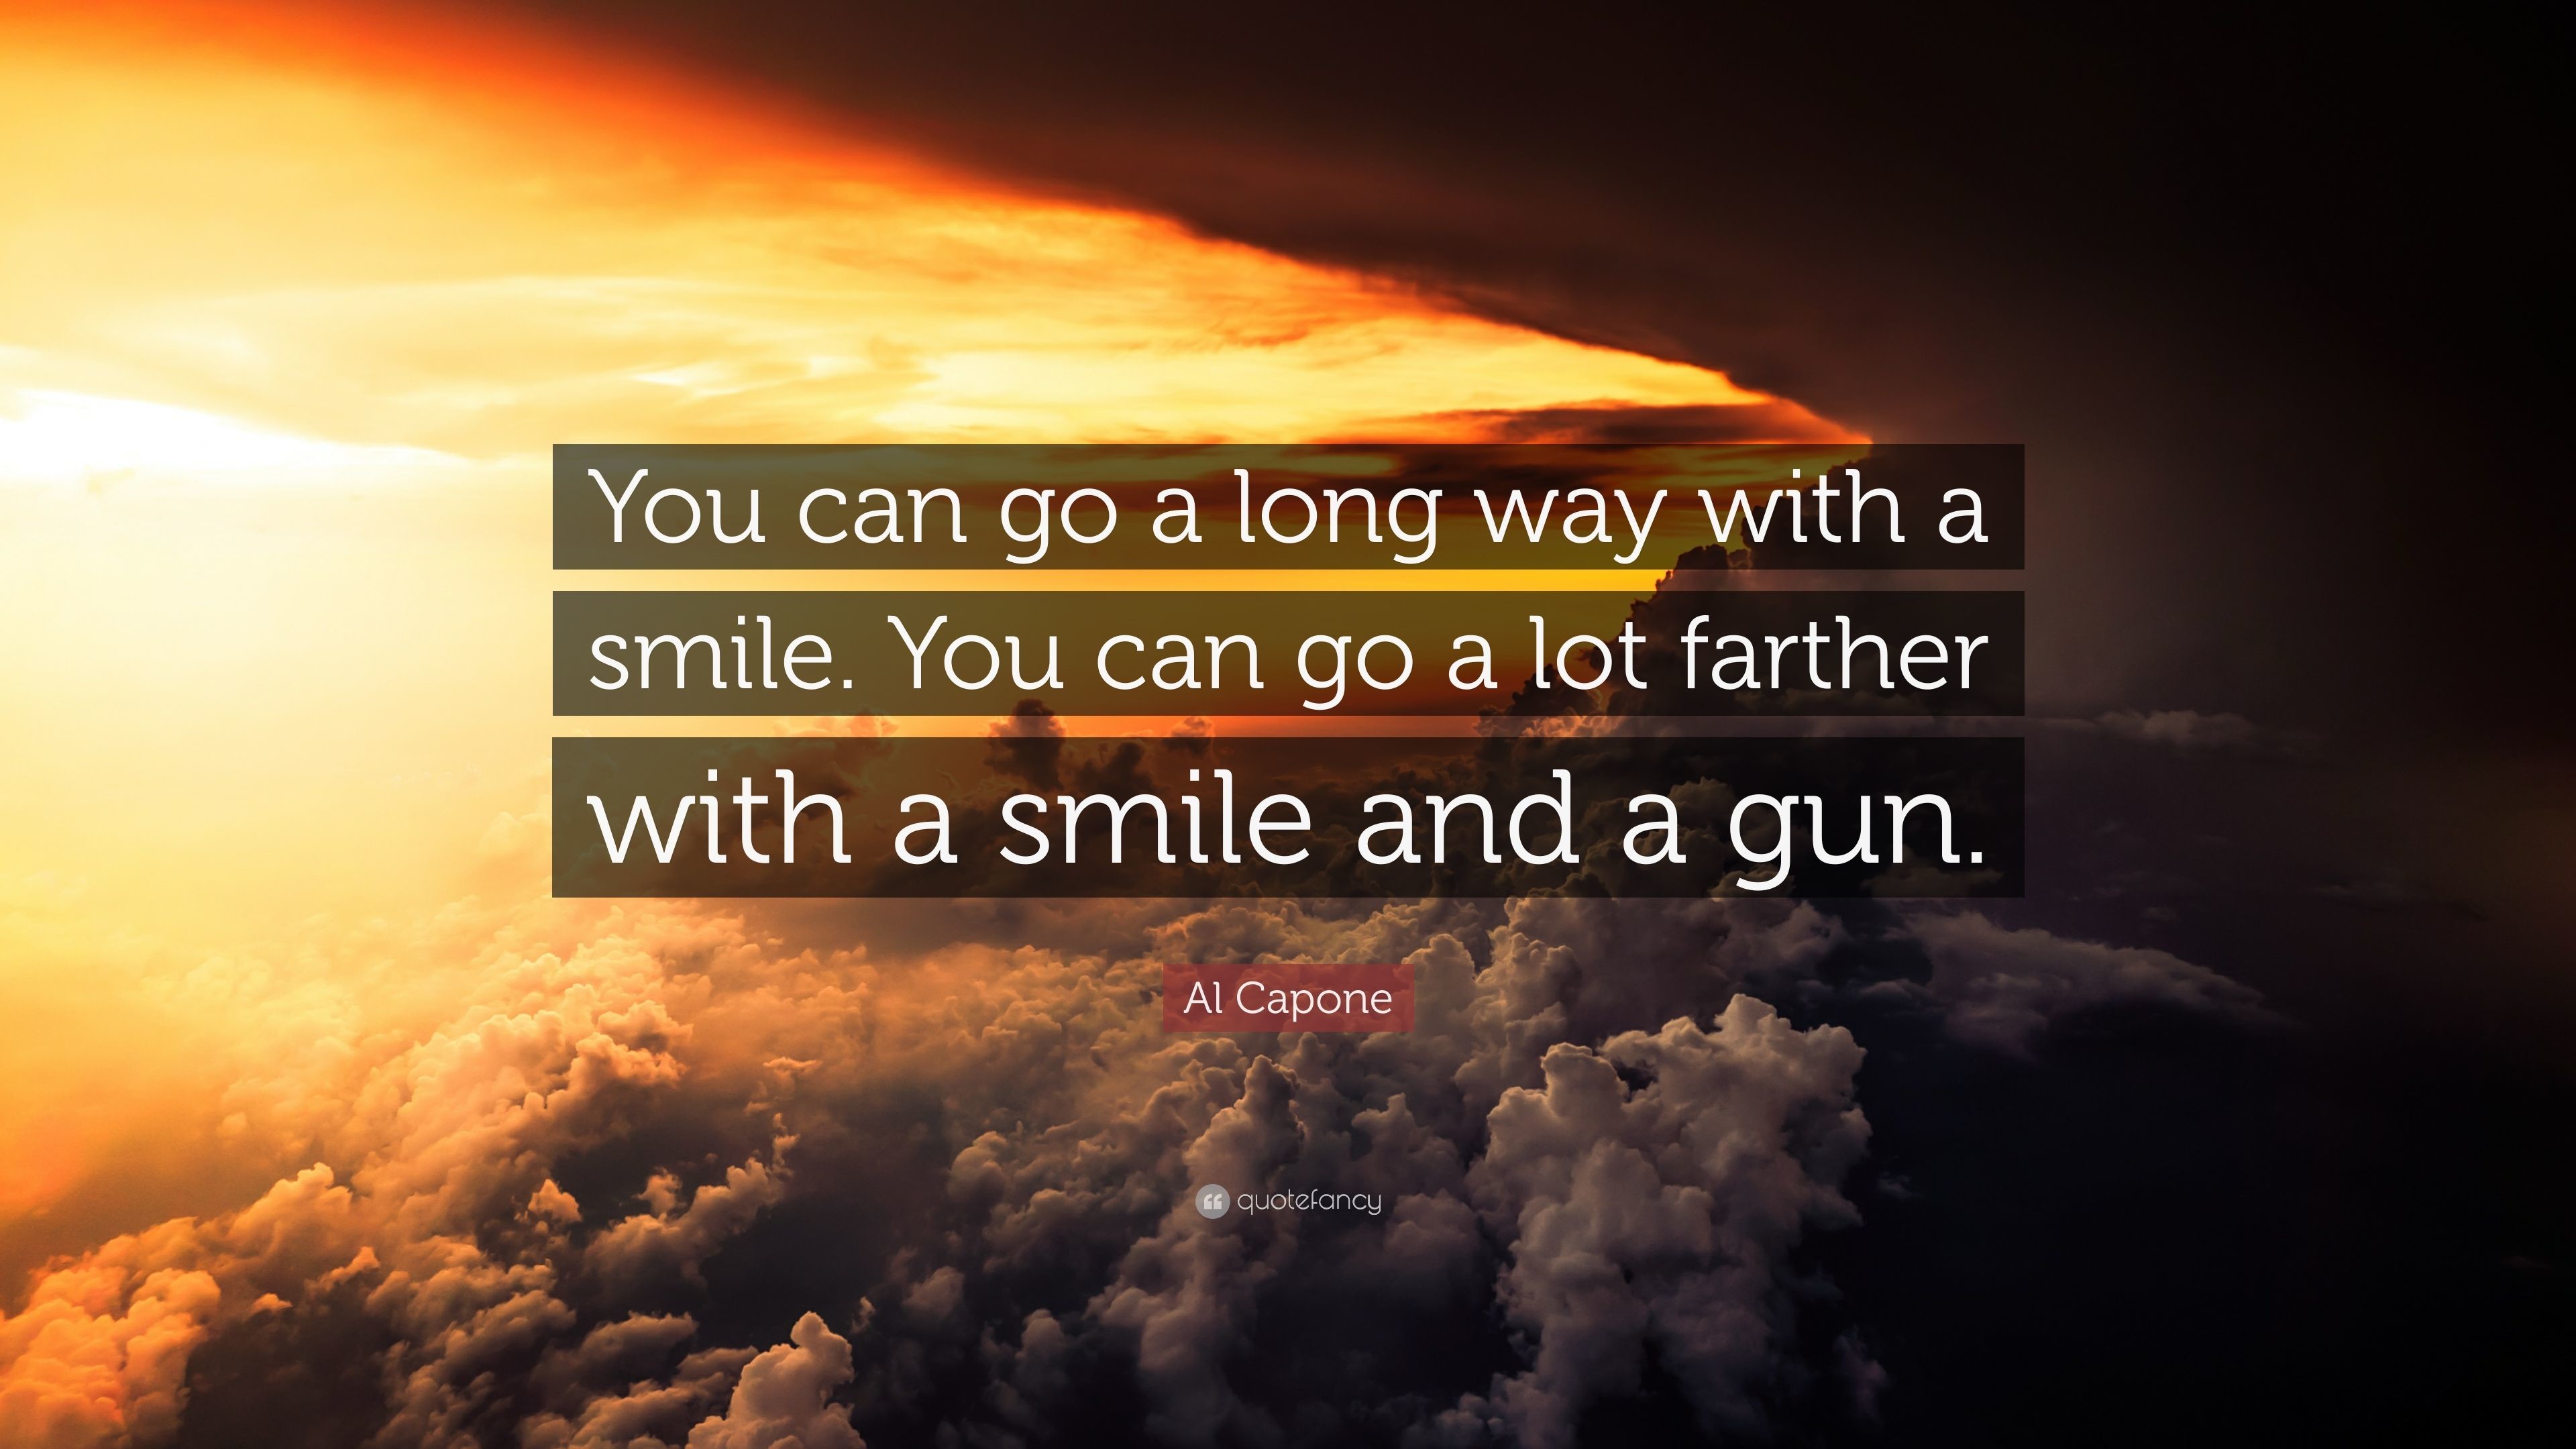 3840x2160 Al Capone Quote: “You can go a long way with a smile. You